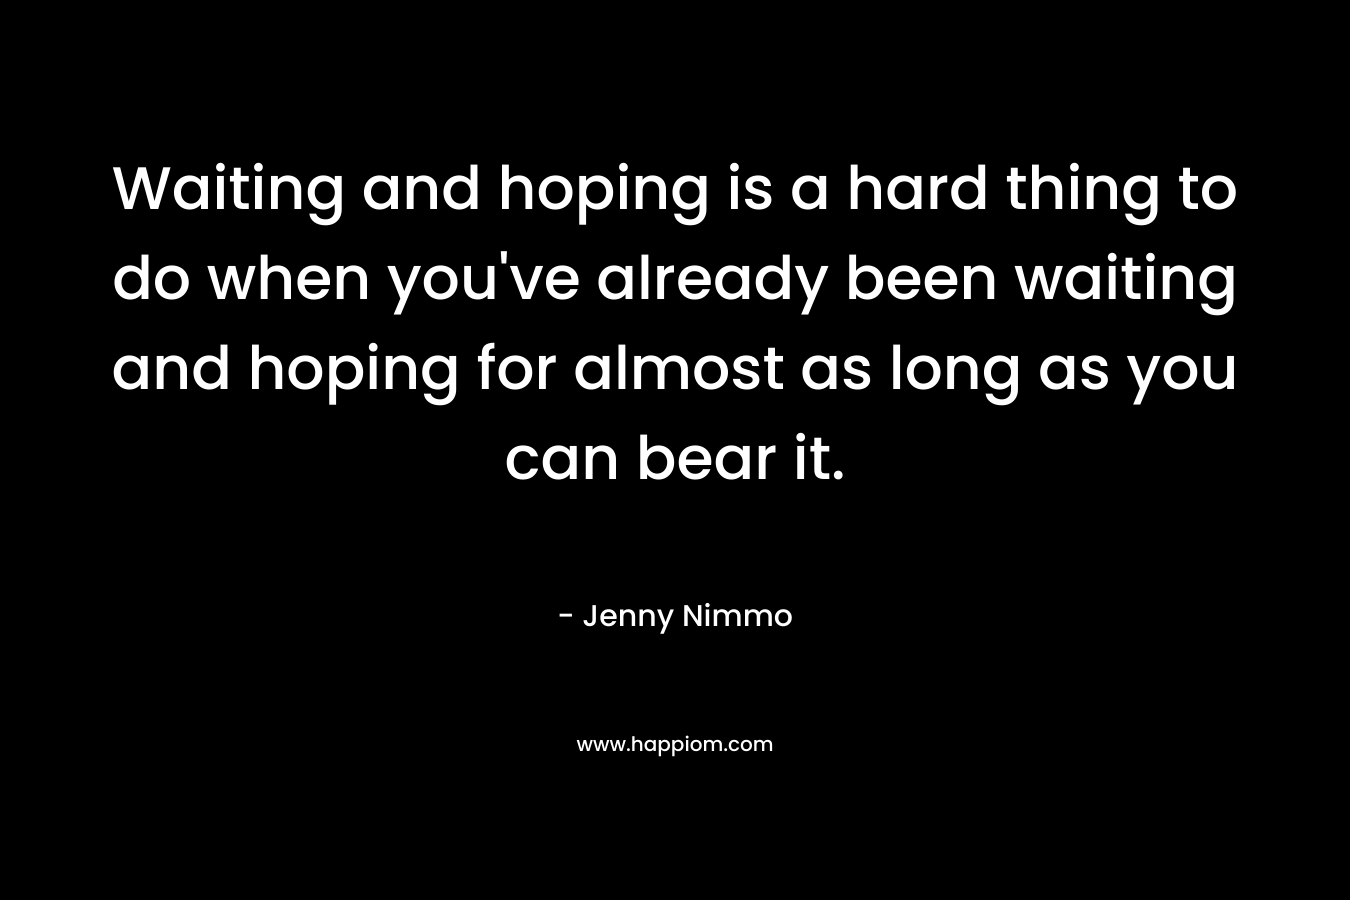 Waiting and hoping is a hard thing to do when you’ve already been waiting and hoping for almost as long as you can bear it. – Jenny Nimmo